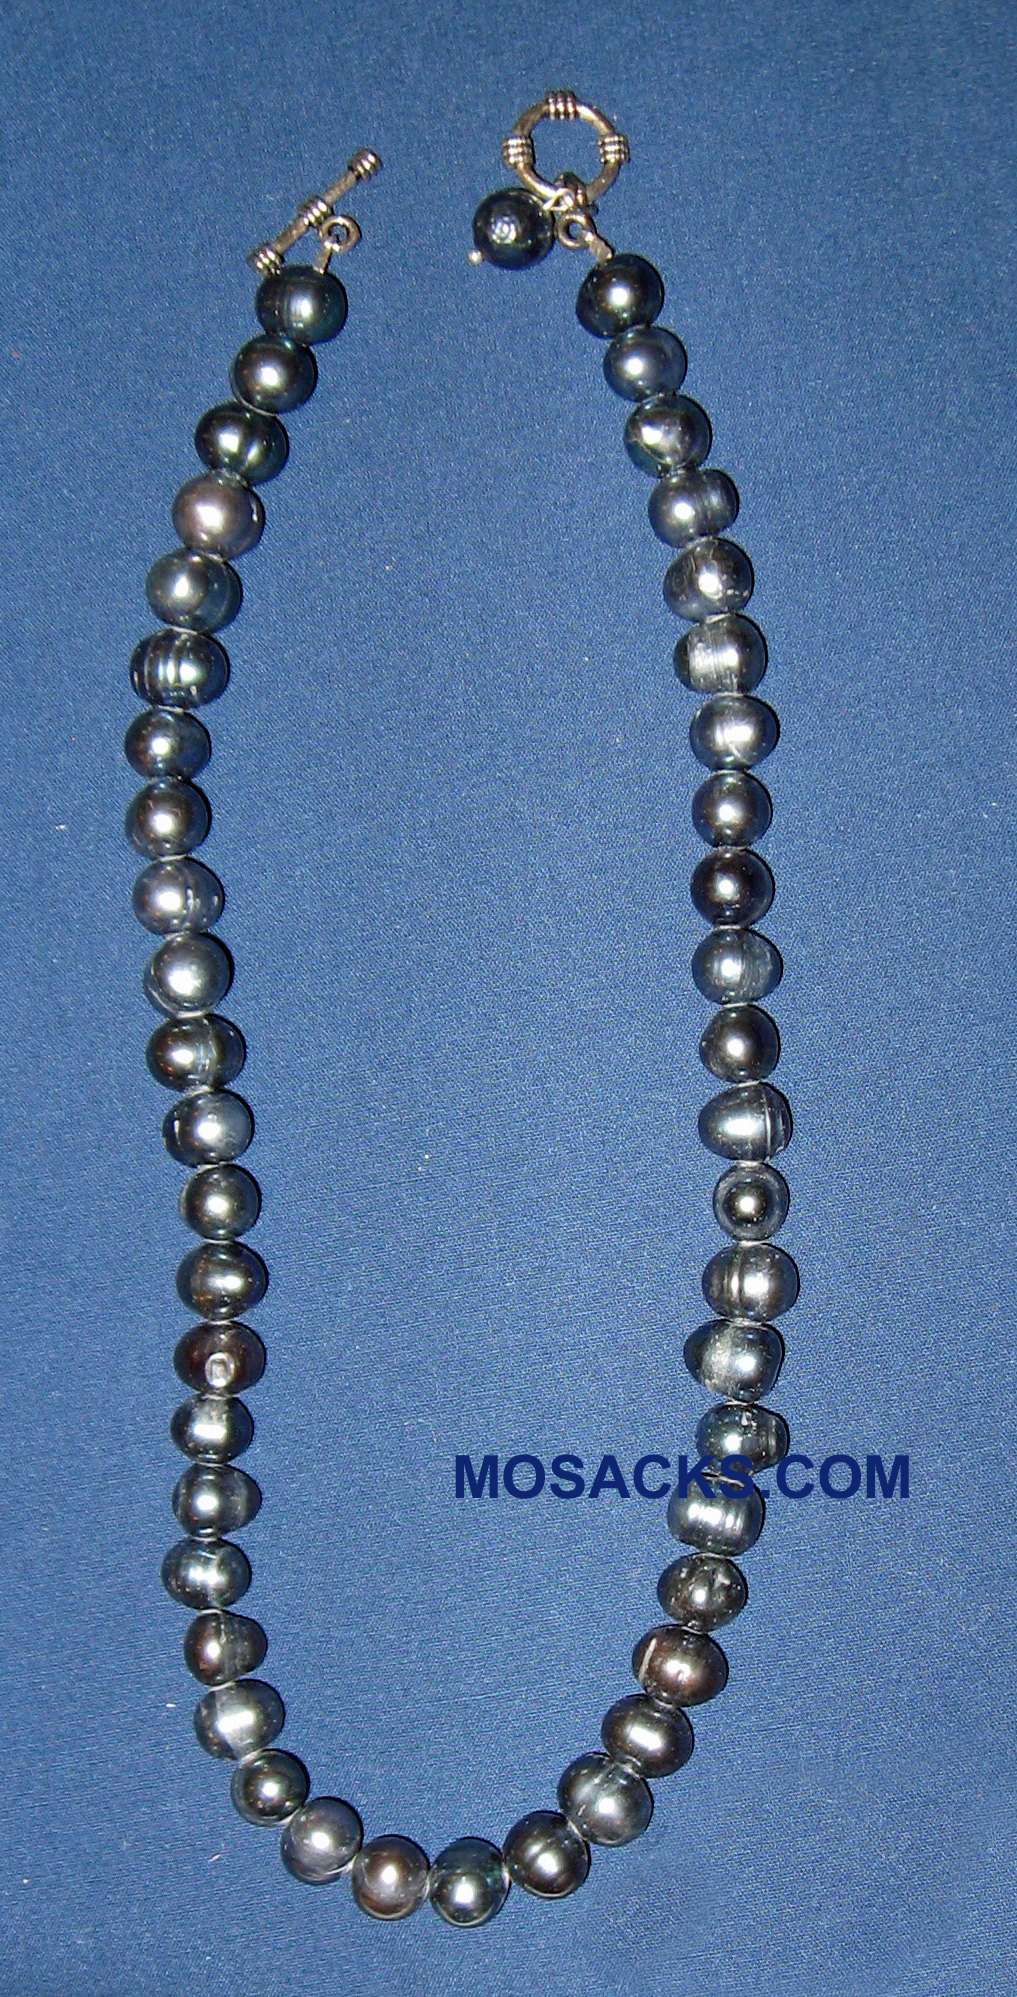 Fresh Water Pearl 16 Inch Black Oblong Necklace 418-16-FWPBLK